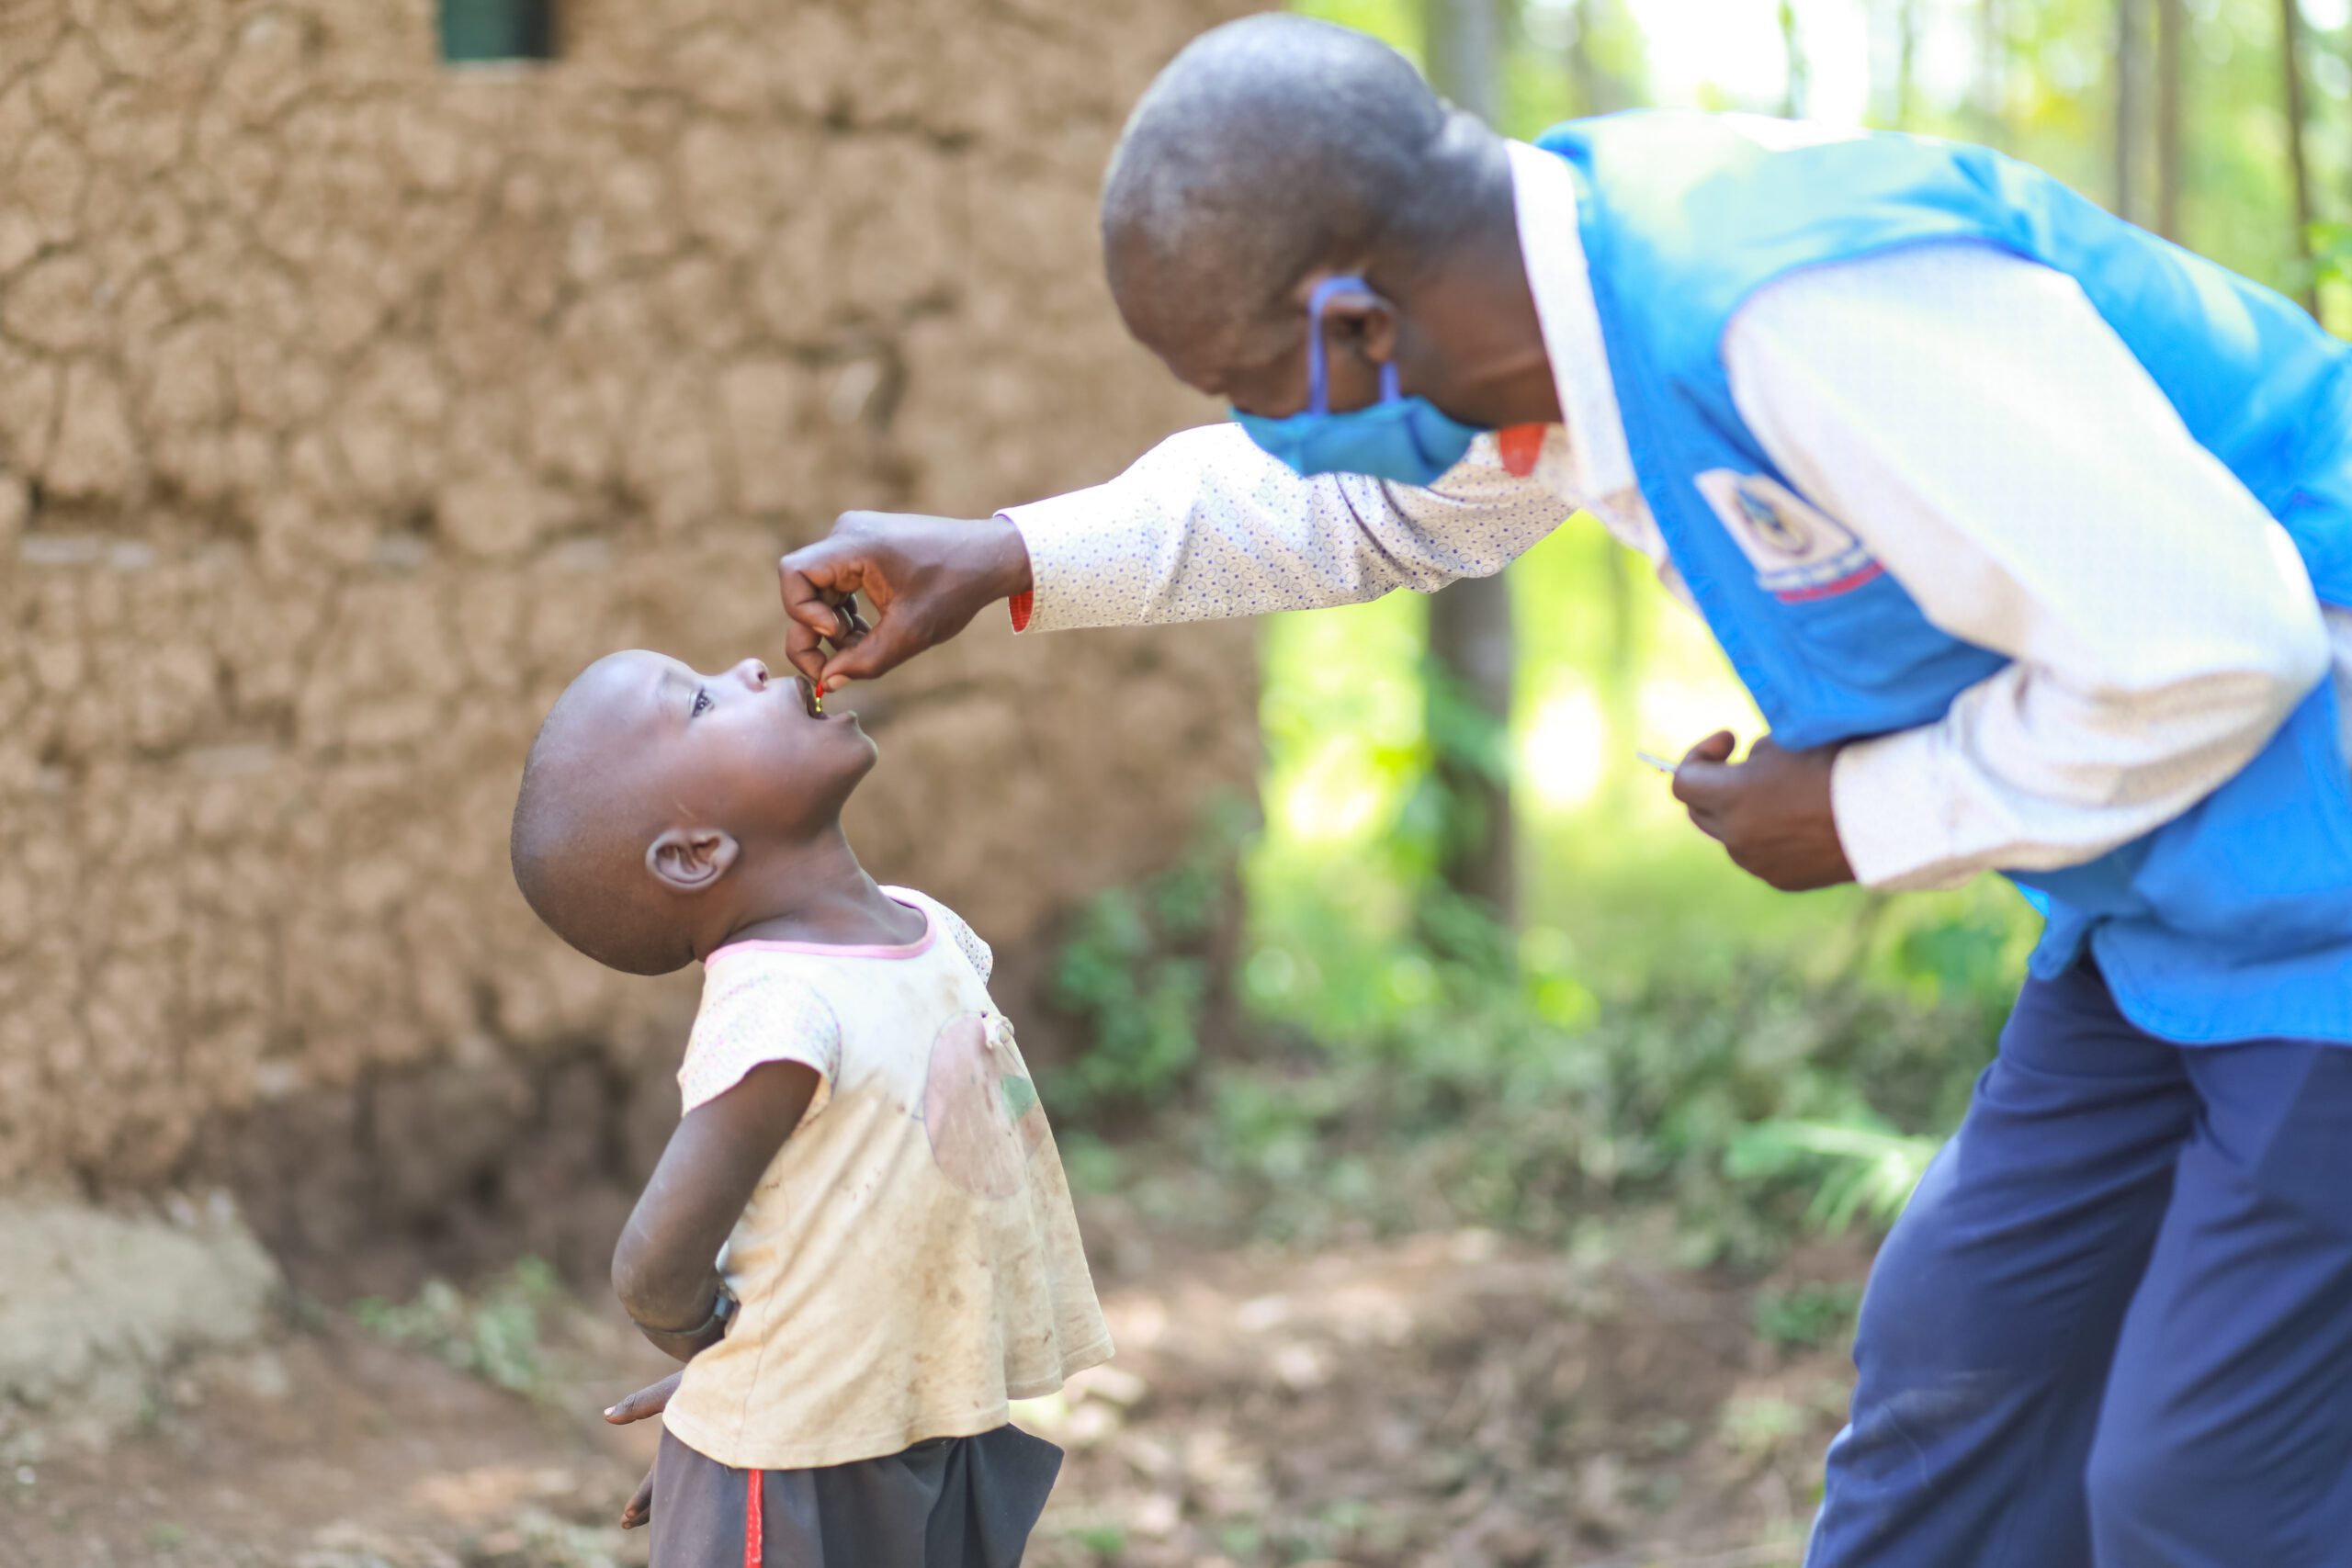 A health worker administers vitamin A drops to a child in Kenya